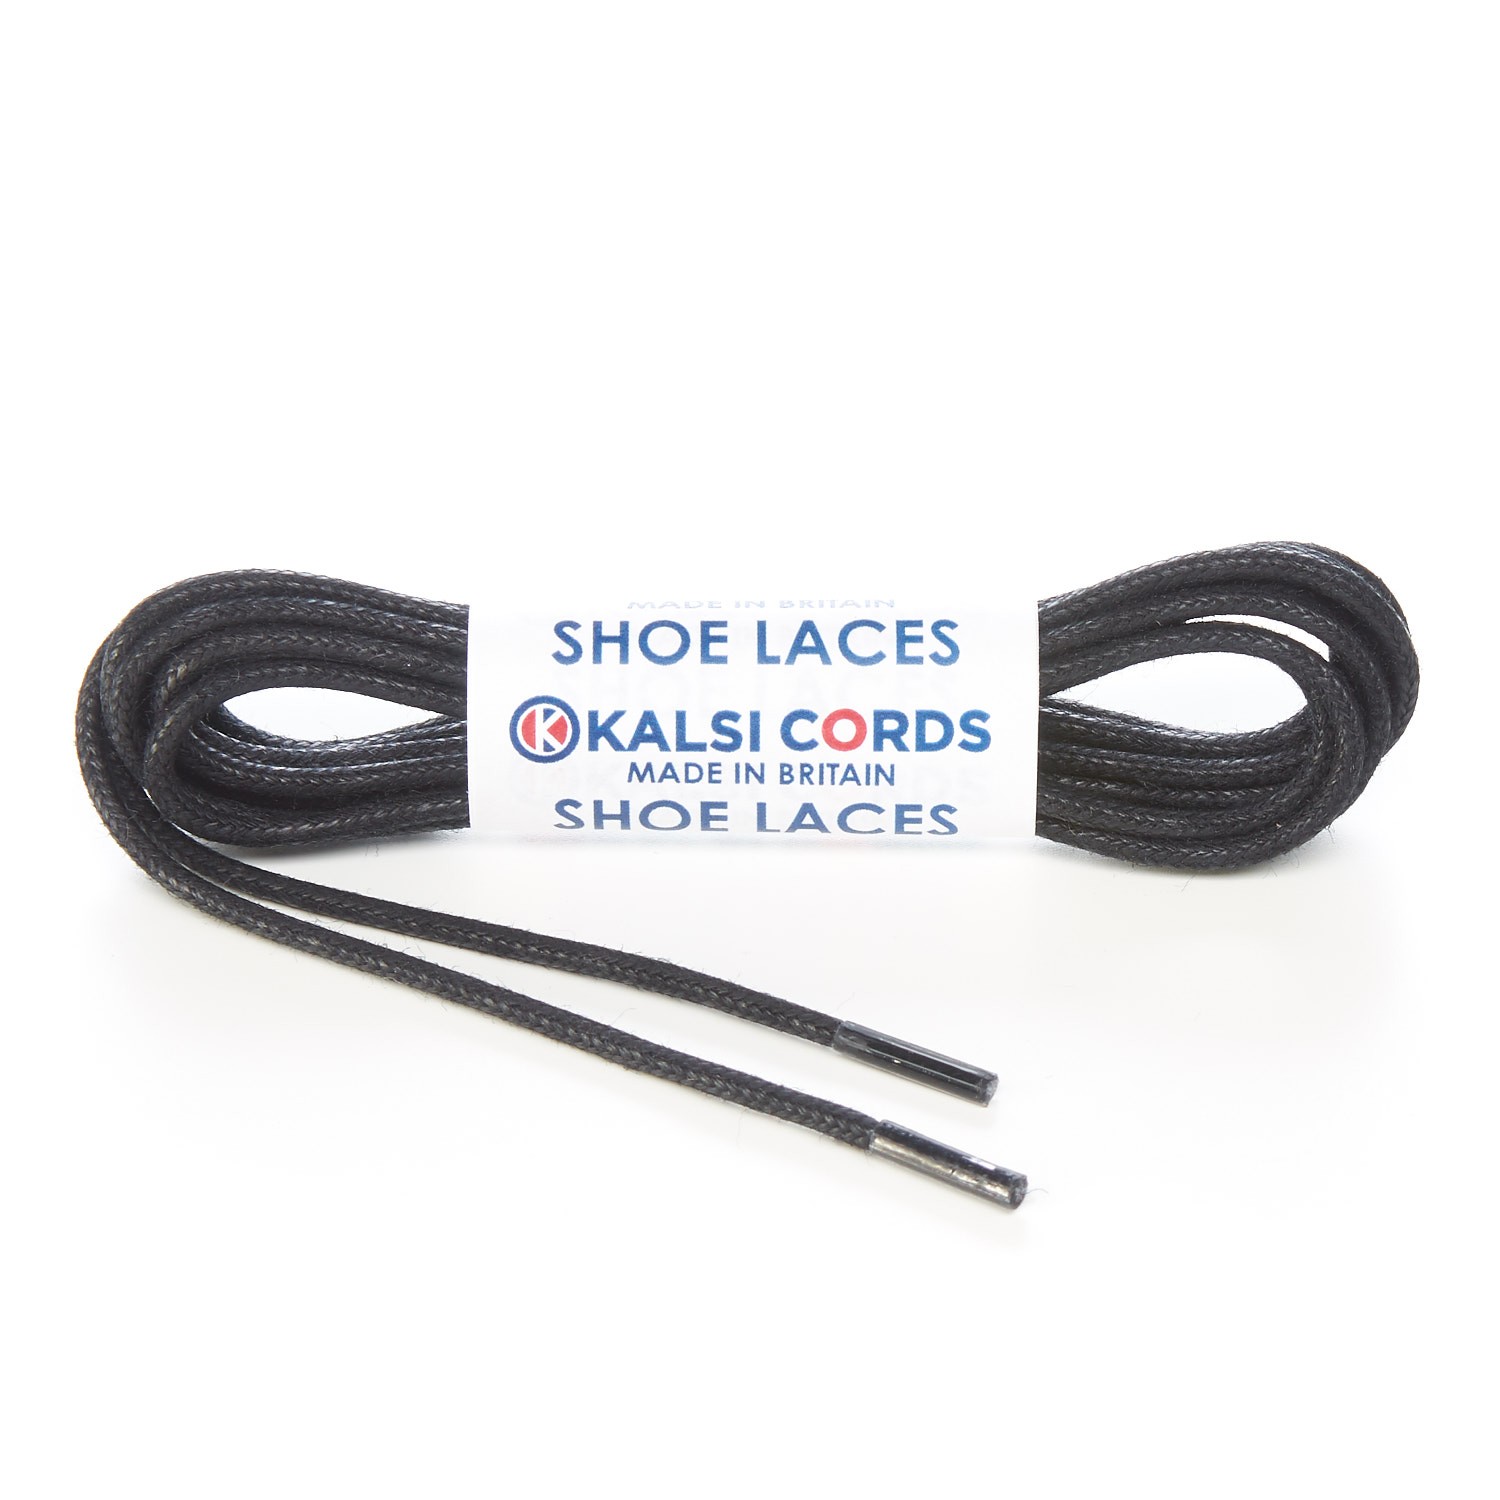 thin waxed shoelaces